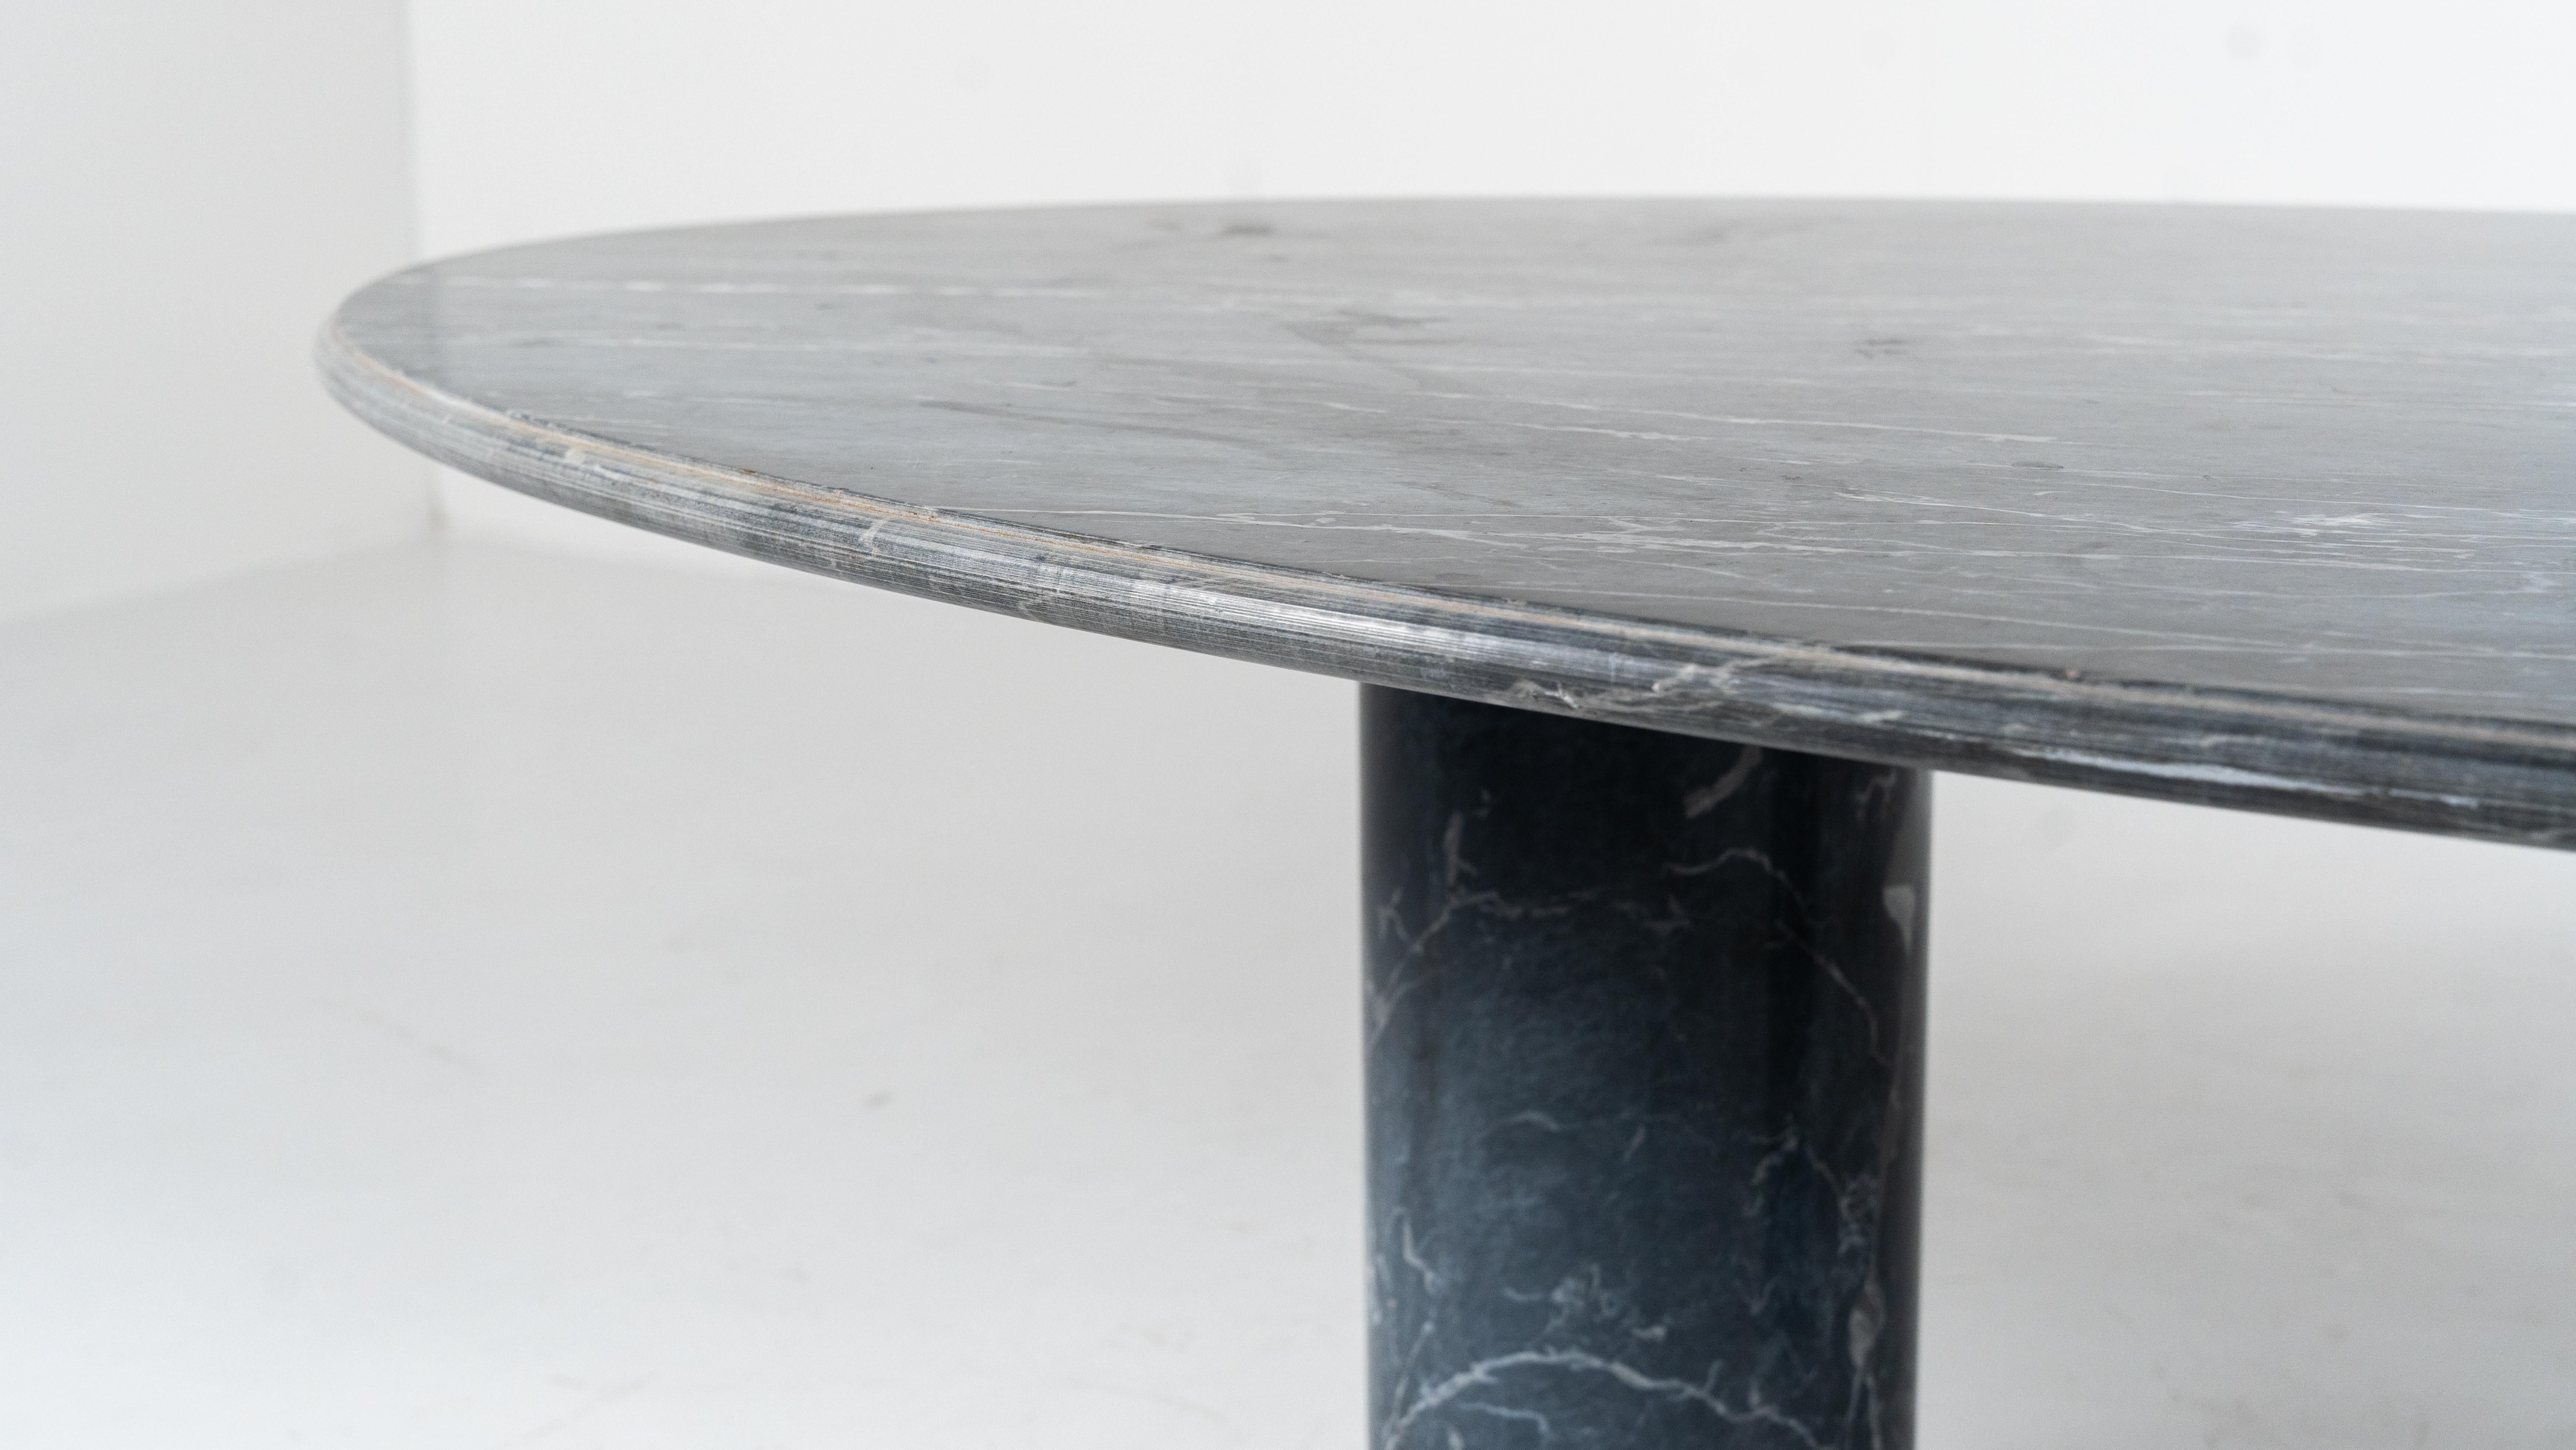 Ovale del Giardiniere Table by Achille Castiglioni for Upgroup, Marble, 1980s In Good Condition For Sale In Brussels, BE